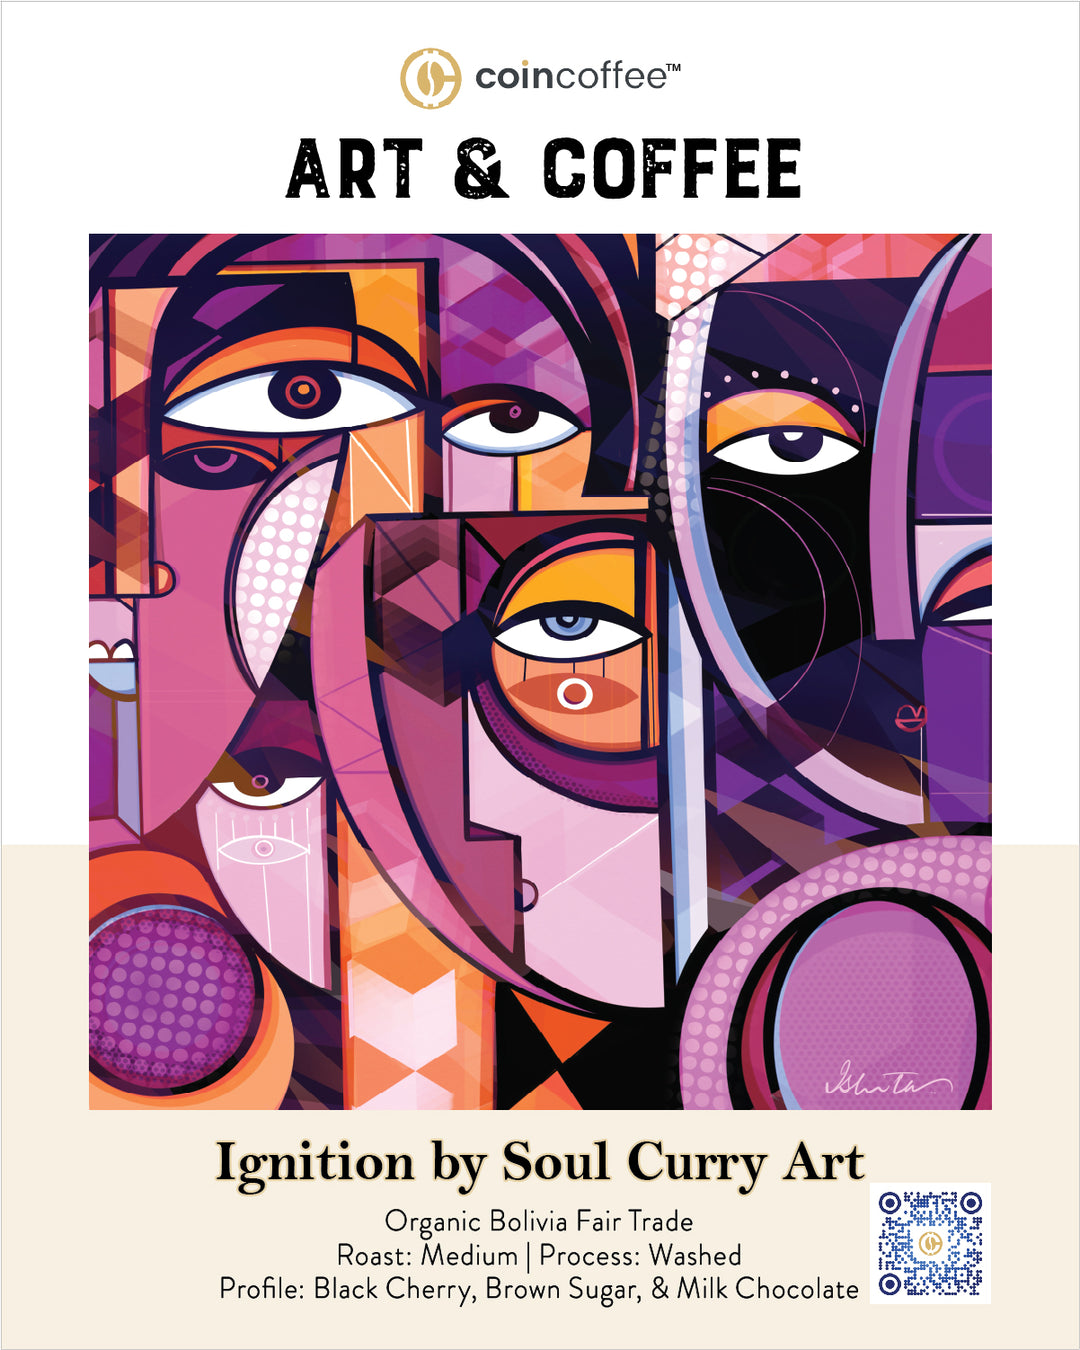 Ignition by Soul Curry Art